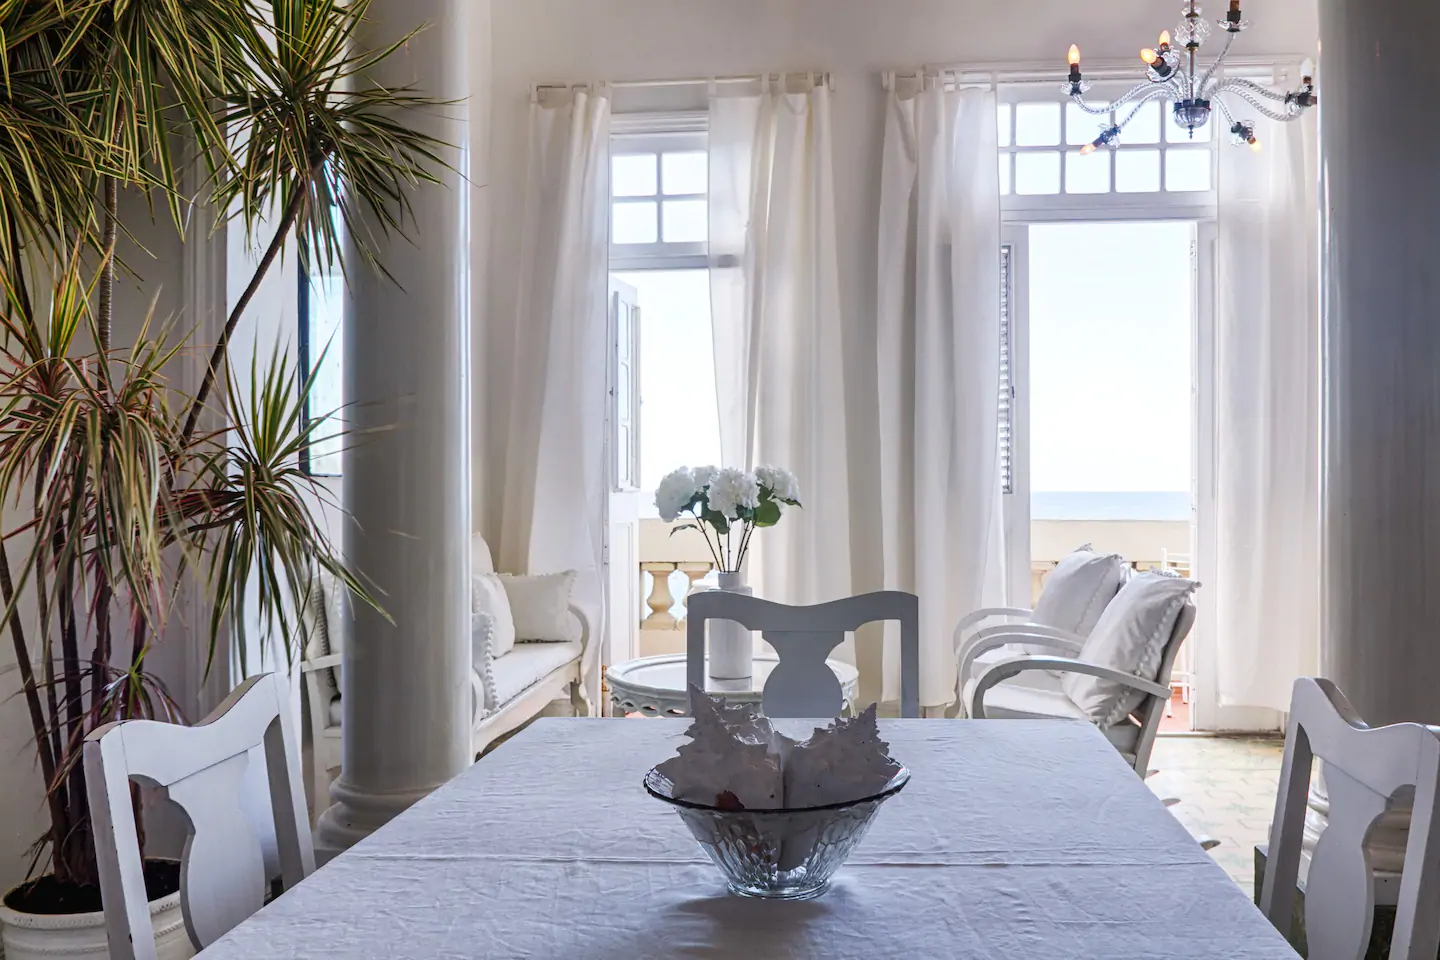 An empty table with a view of the beach through the window.